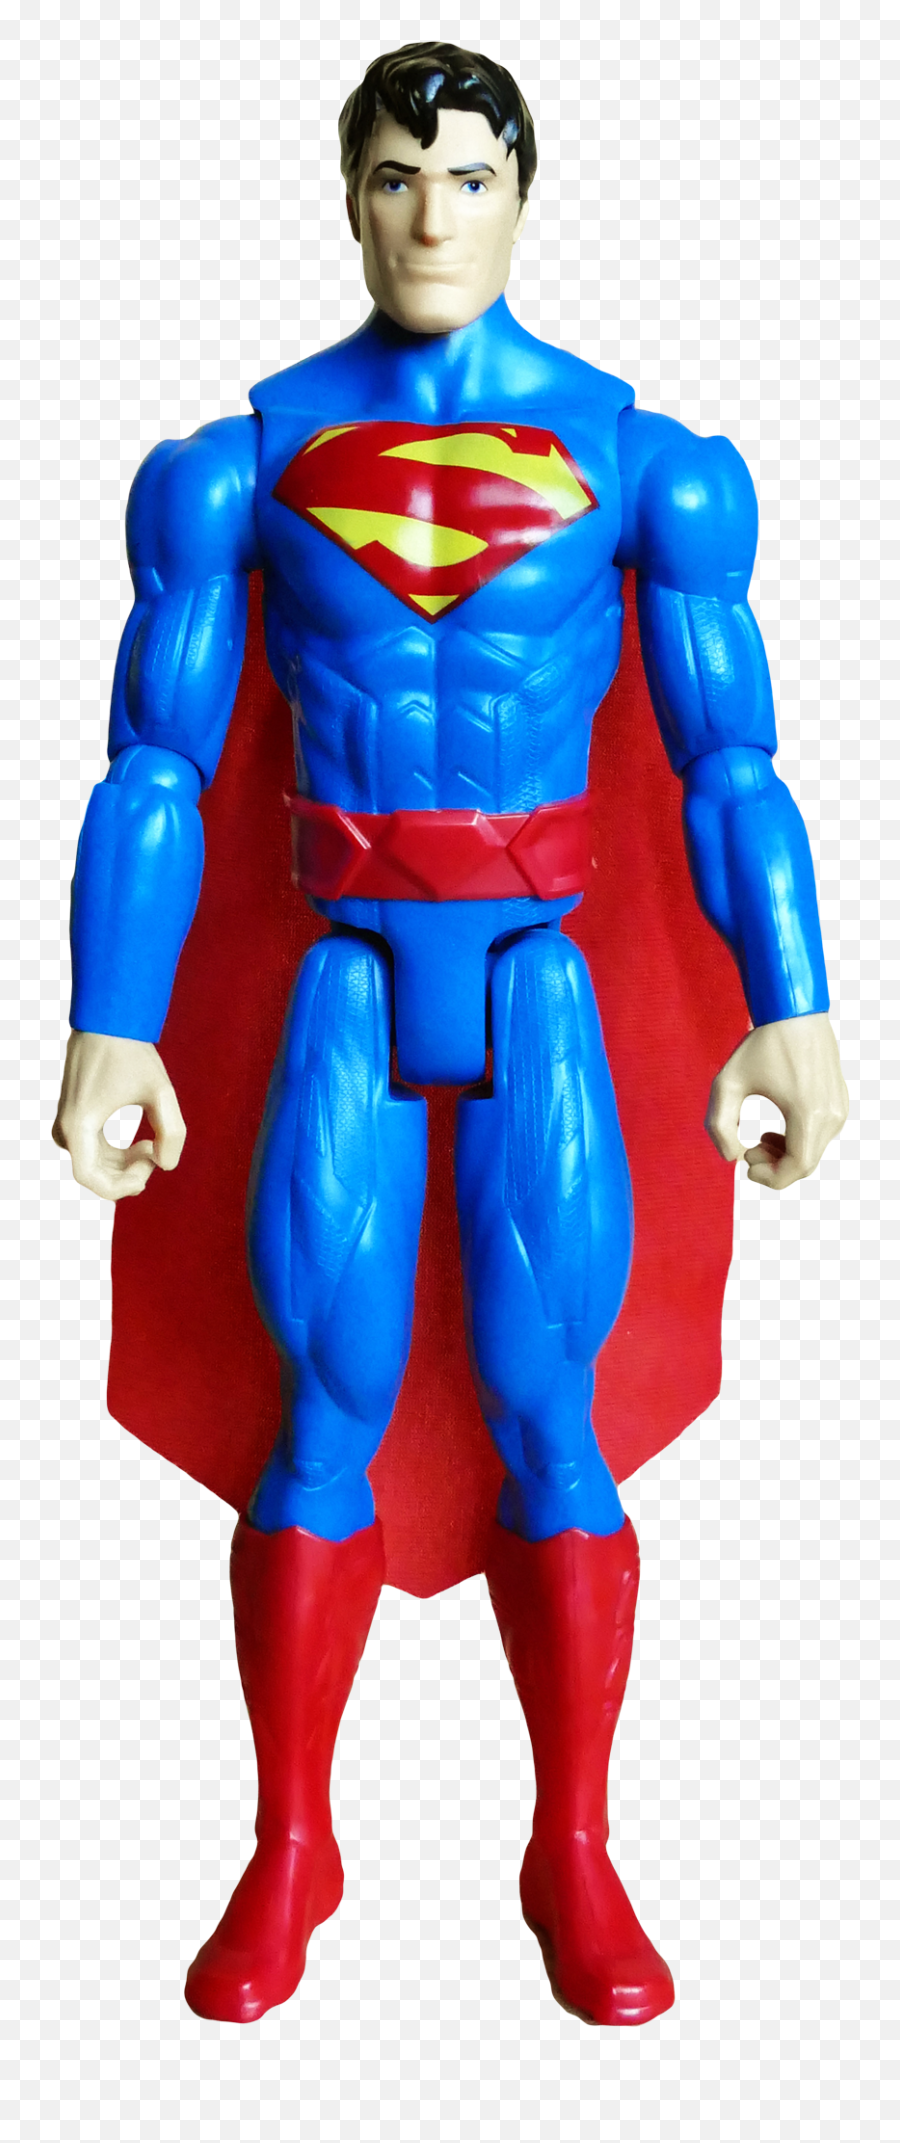 Superman Toys Png Transparent Image - Png Image Of Toys,Toy Png